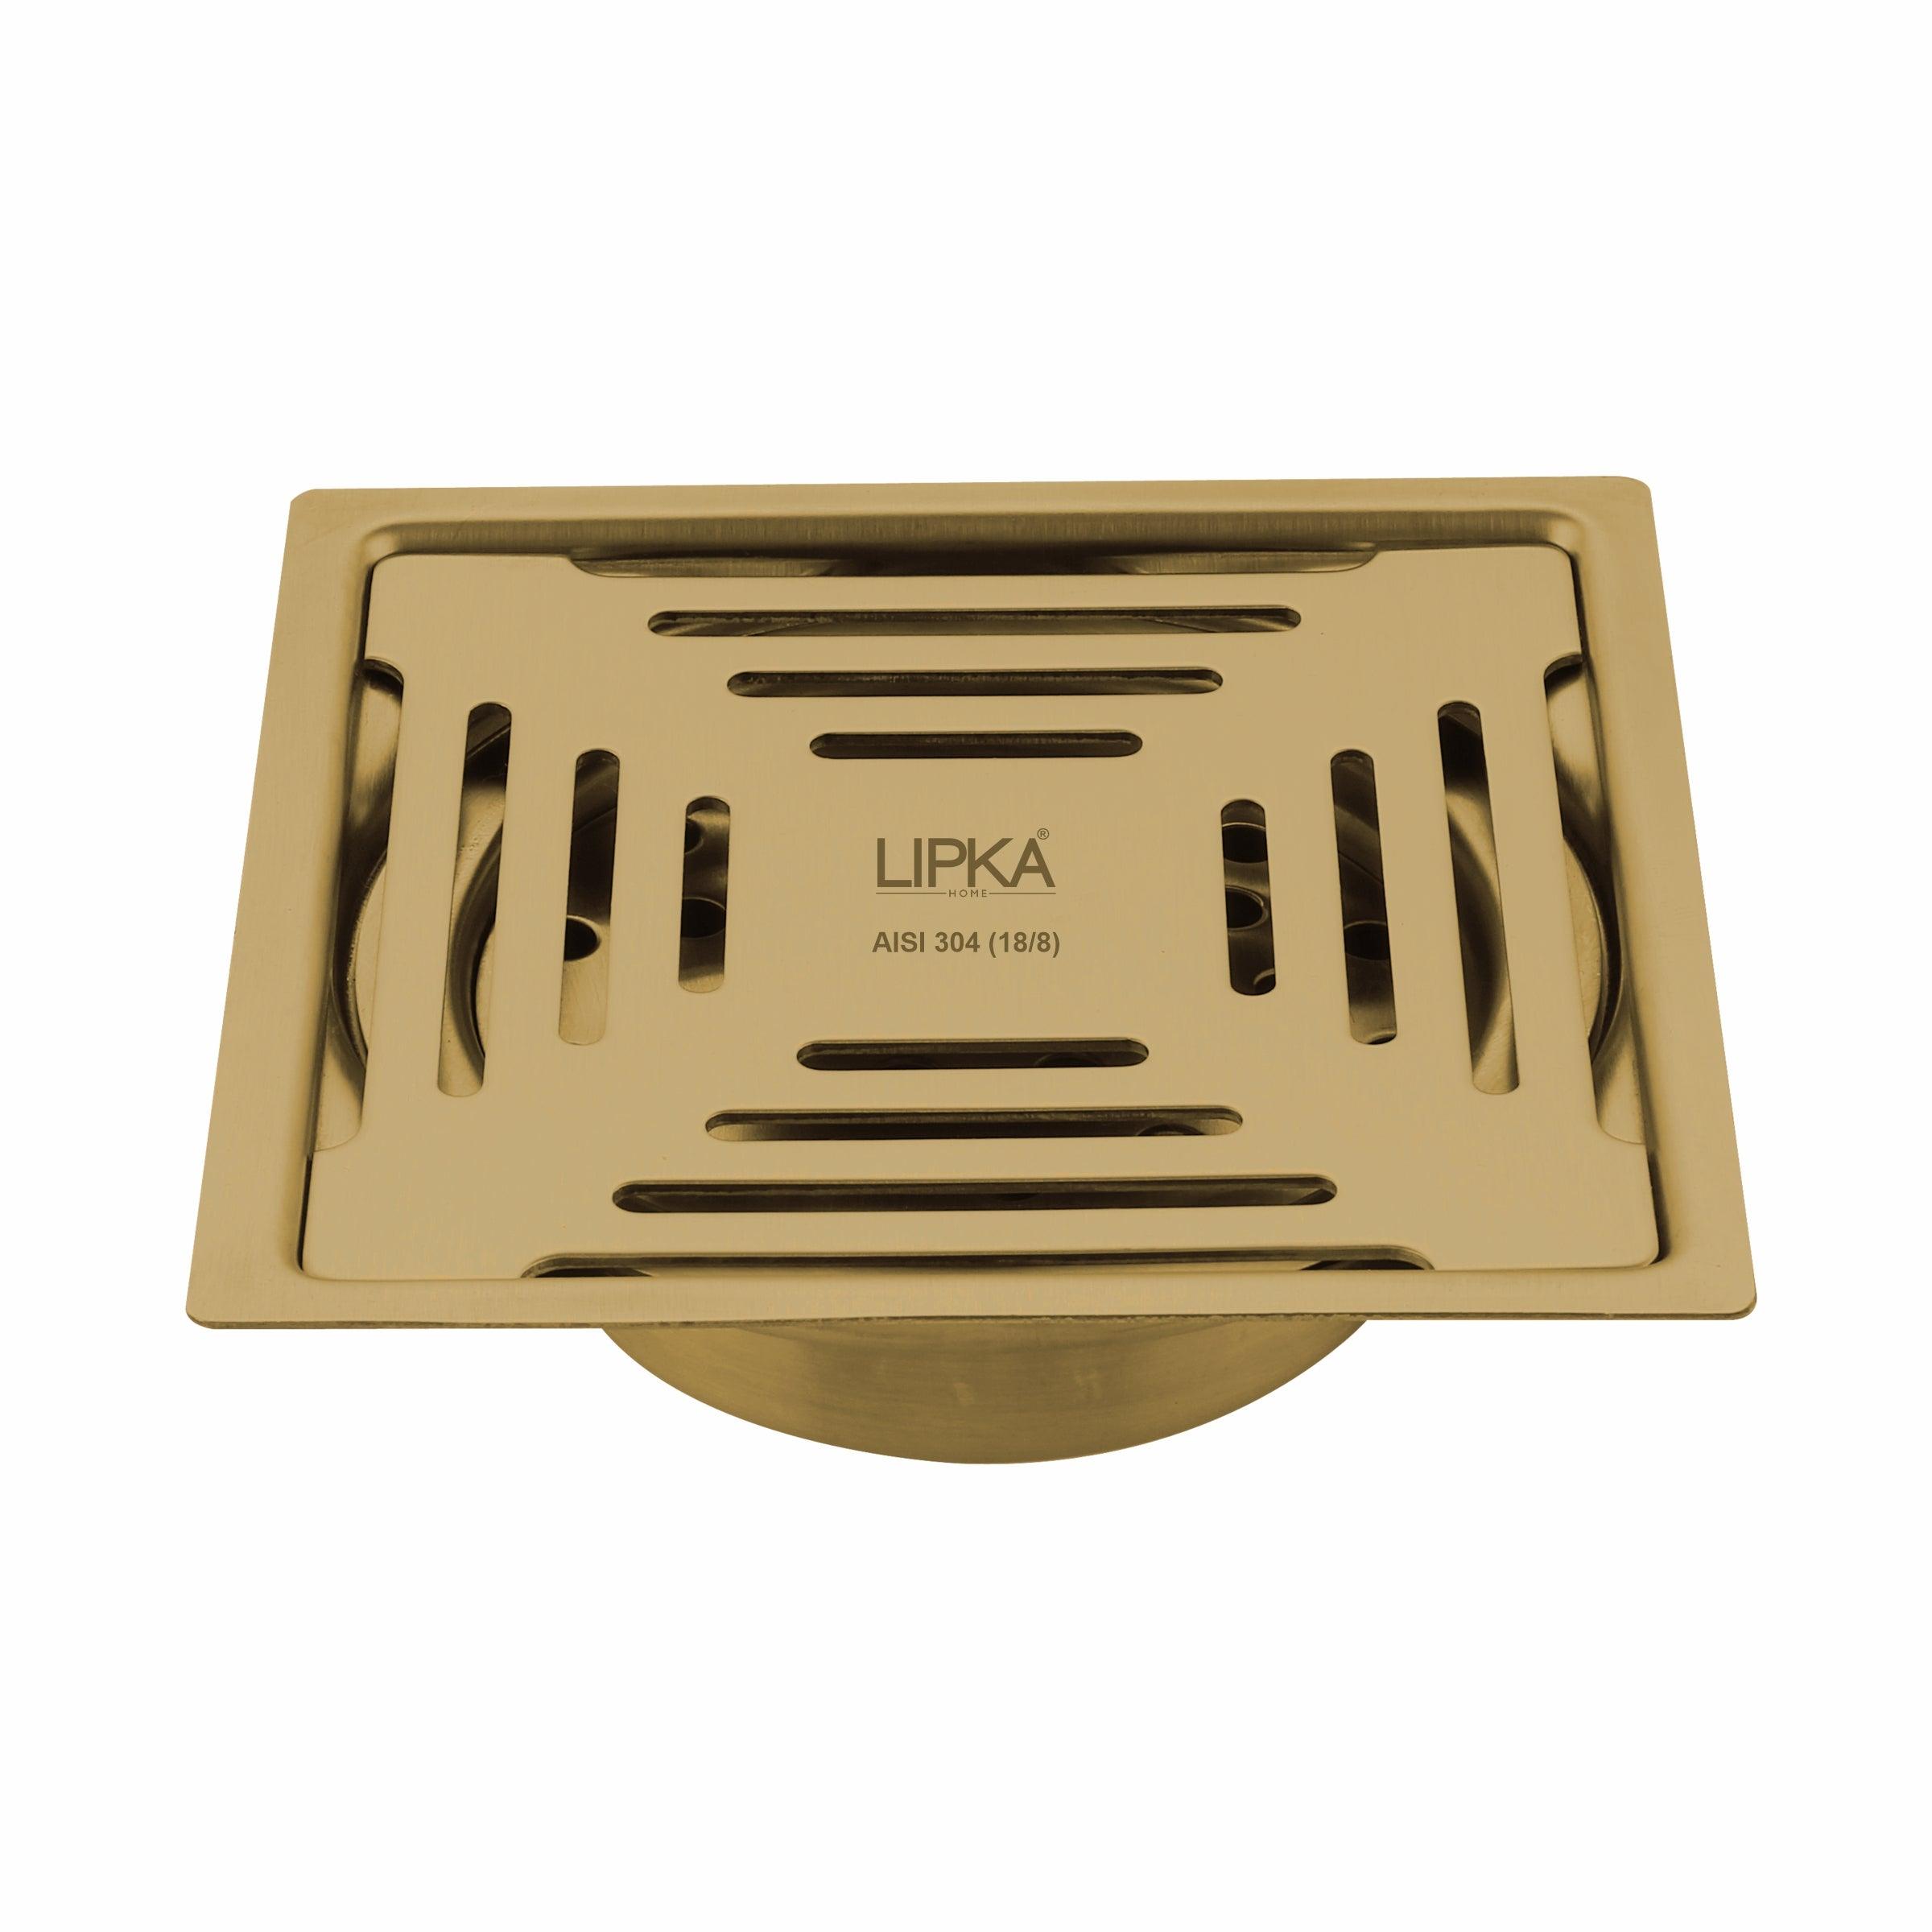 Green Exclusive Square Flat Cut Floor Drain in Yellow Gold PVD Coating (5 x 5 Inches) with Cockroach Trap - LIPKA